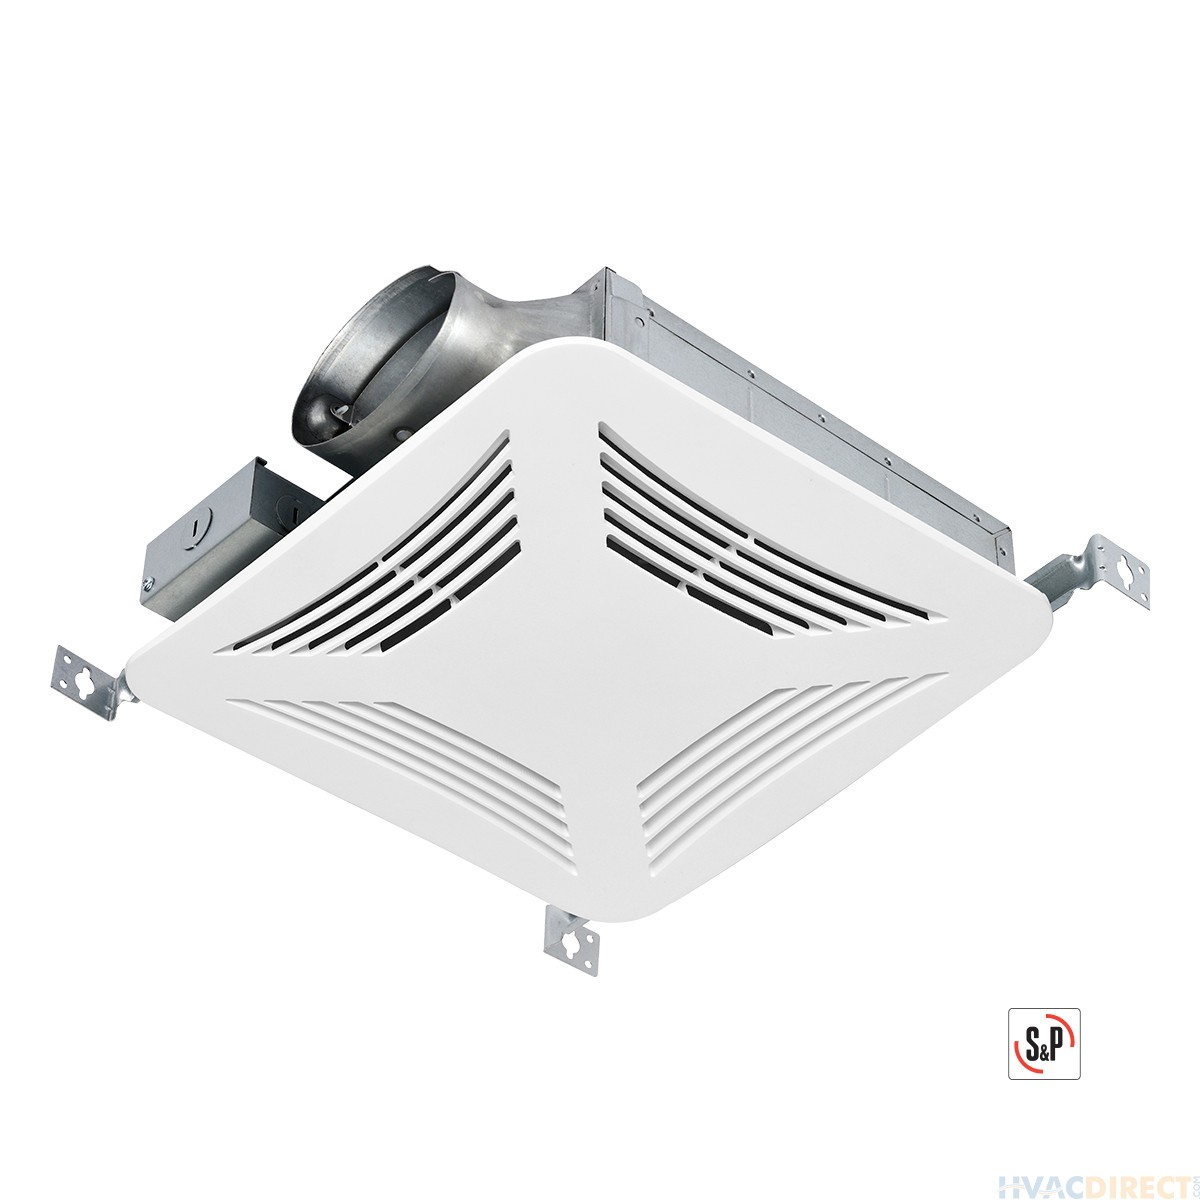 Sp Premium Choice Ceiling Mounted Bathroom Exhaust Fan 100 Cfm Pclp100 intended for proportions 1200 X 1200